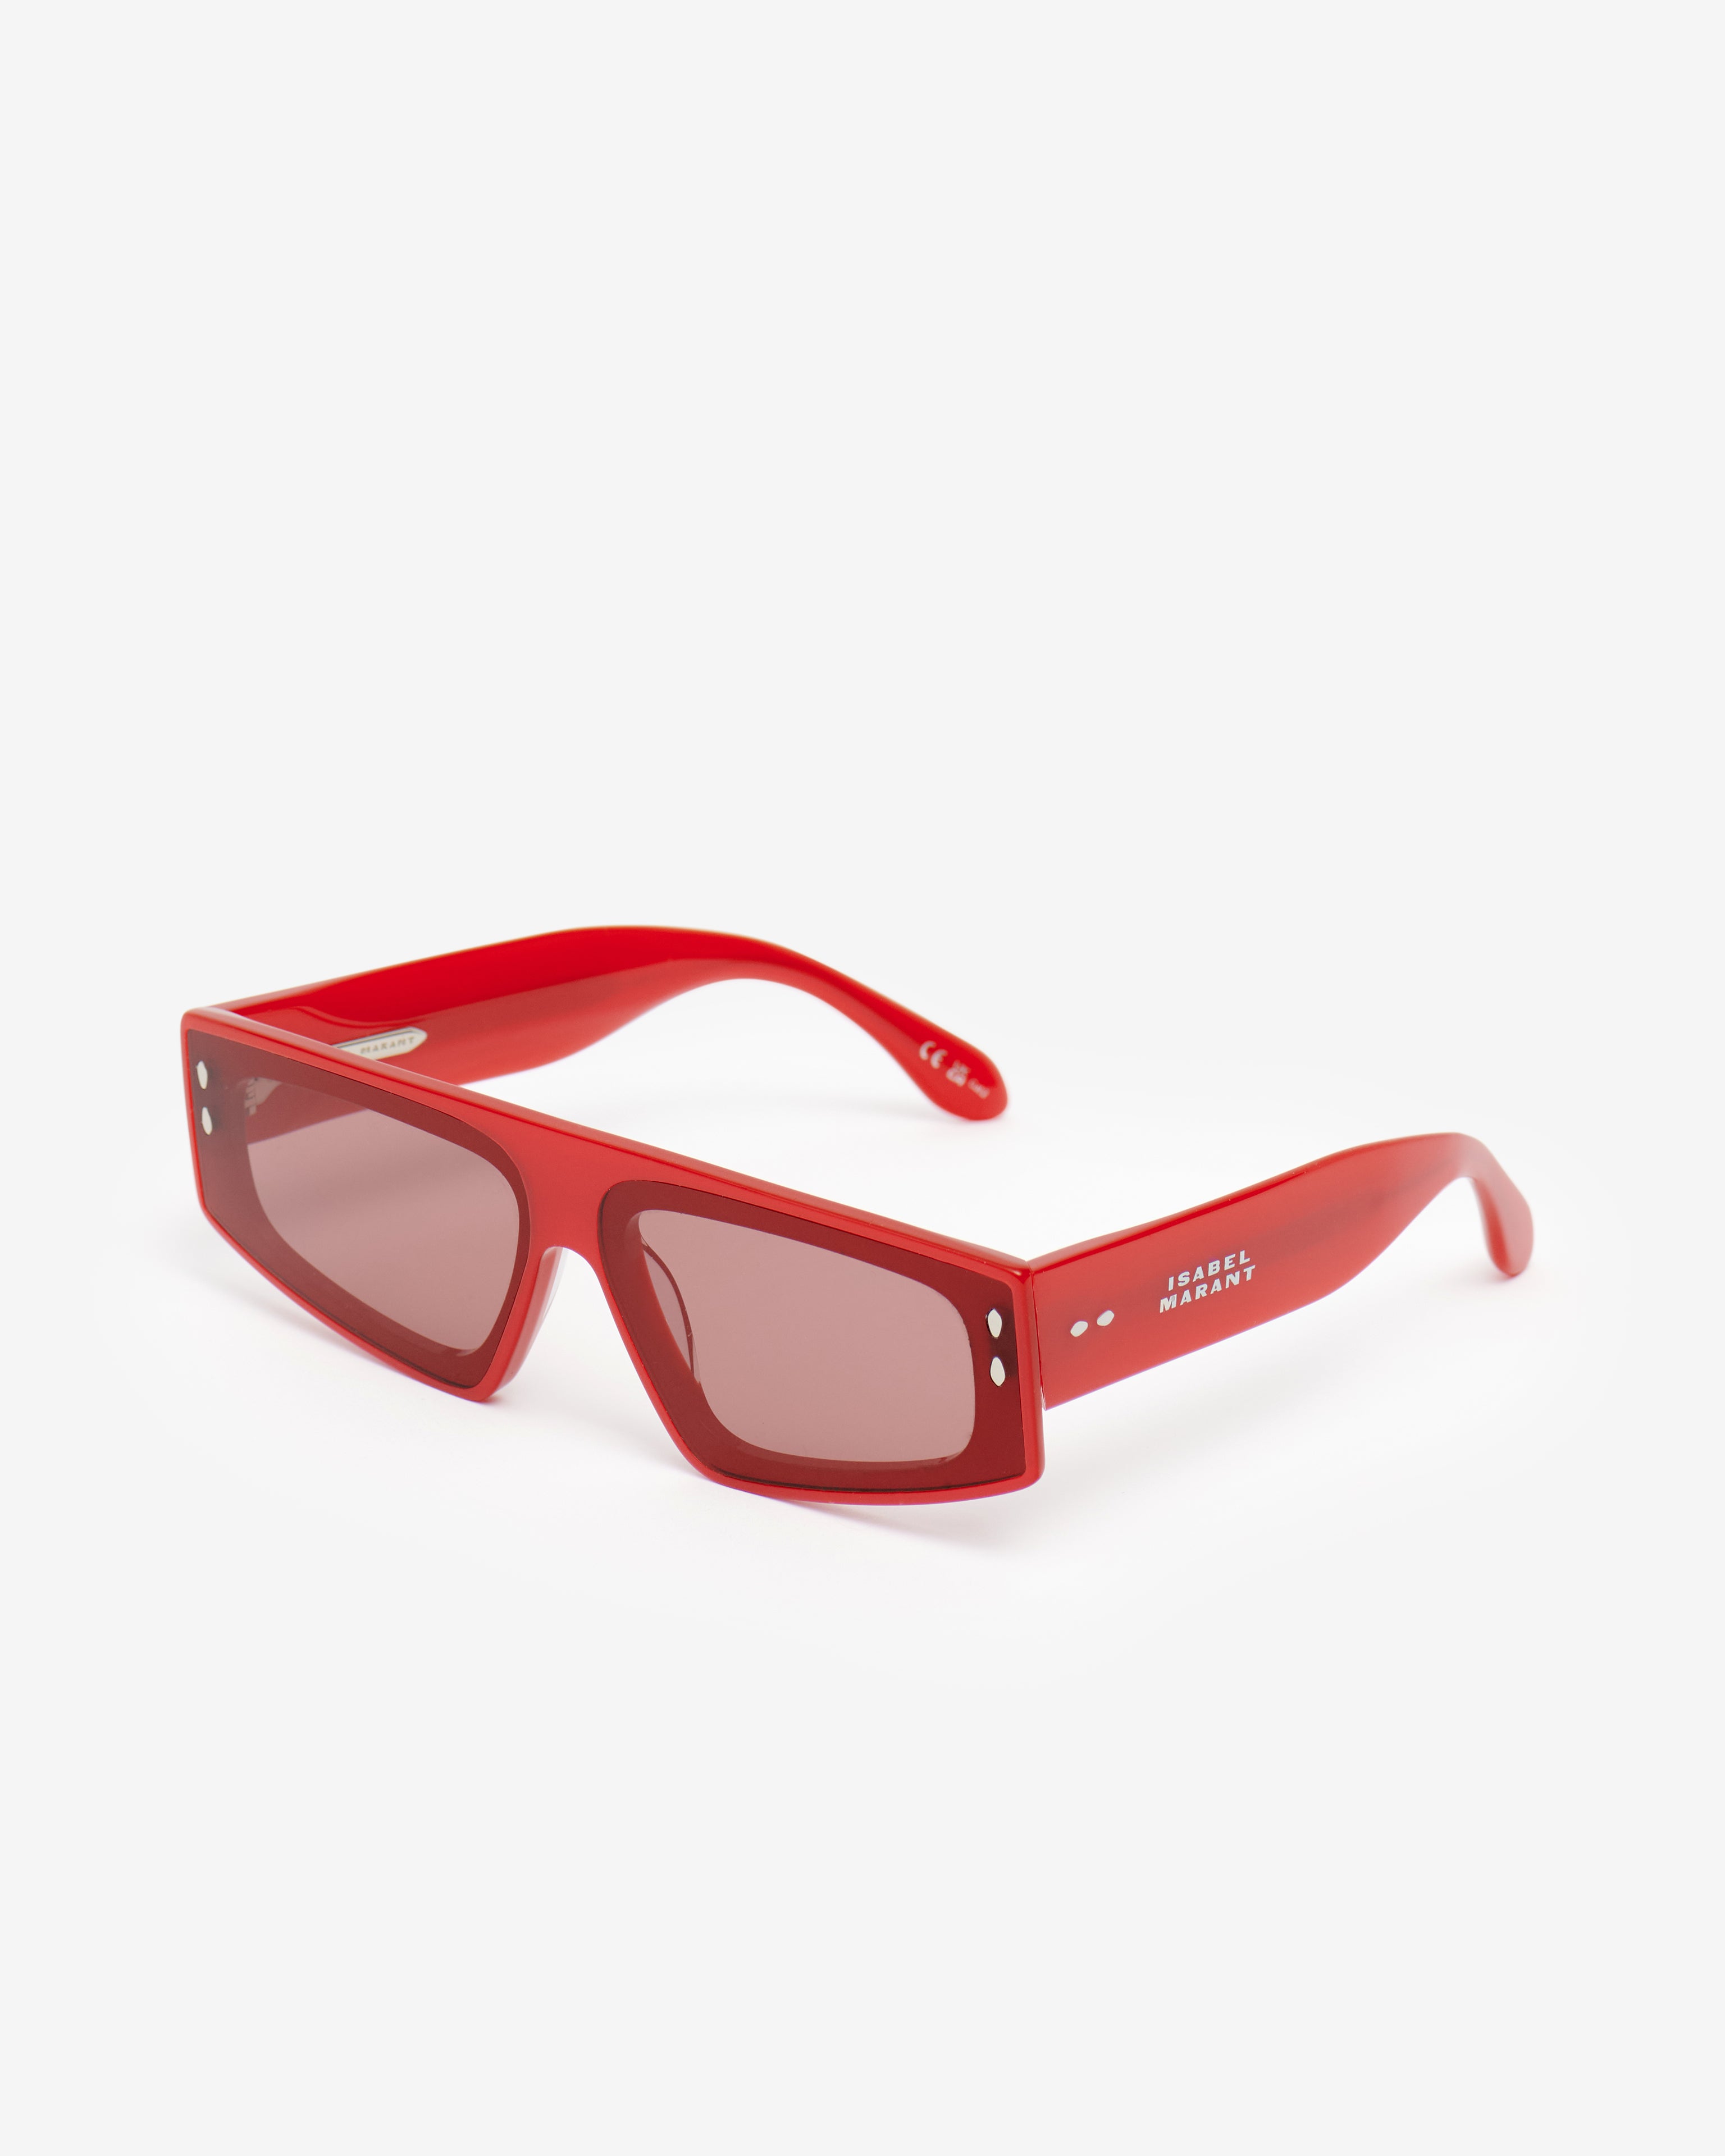 Sonnenbrille zoomy Woman Pearled red-burgundy 3